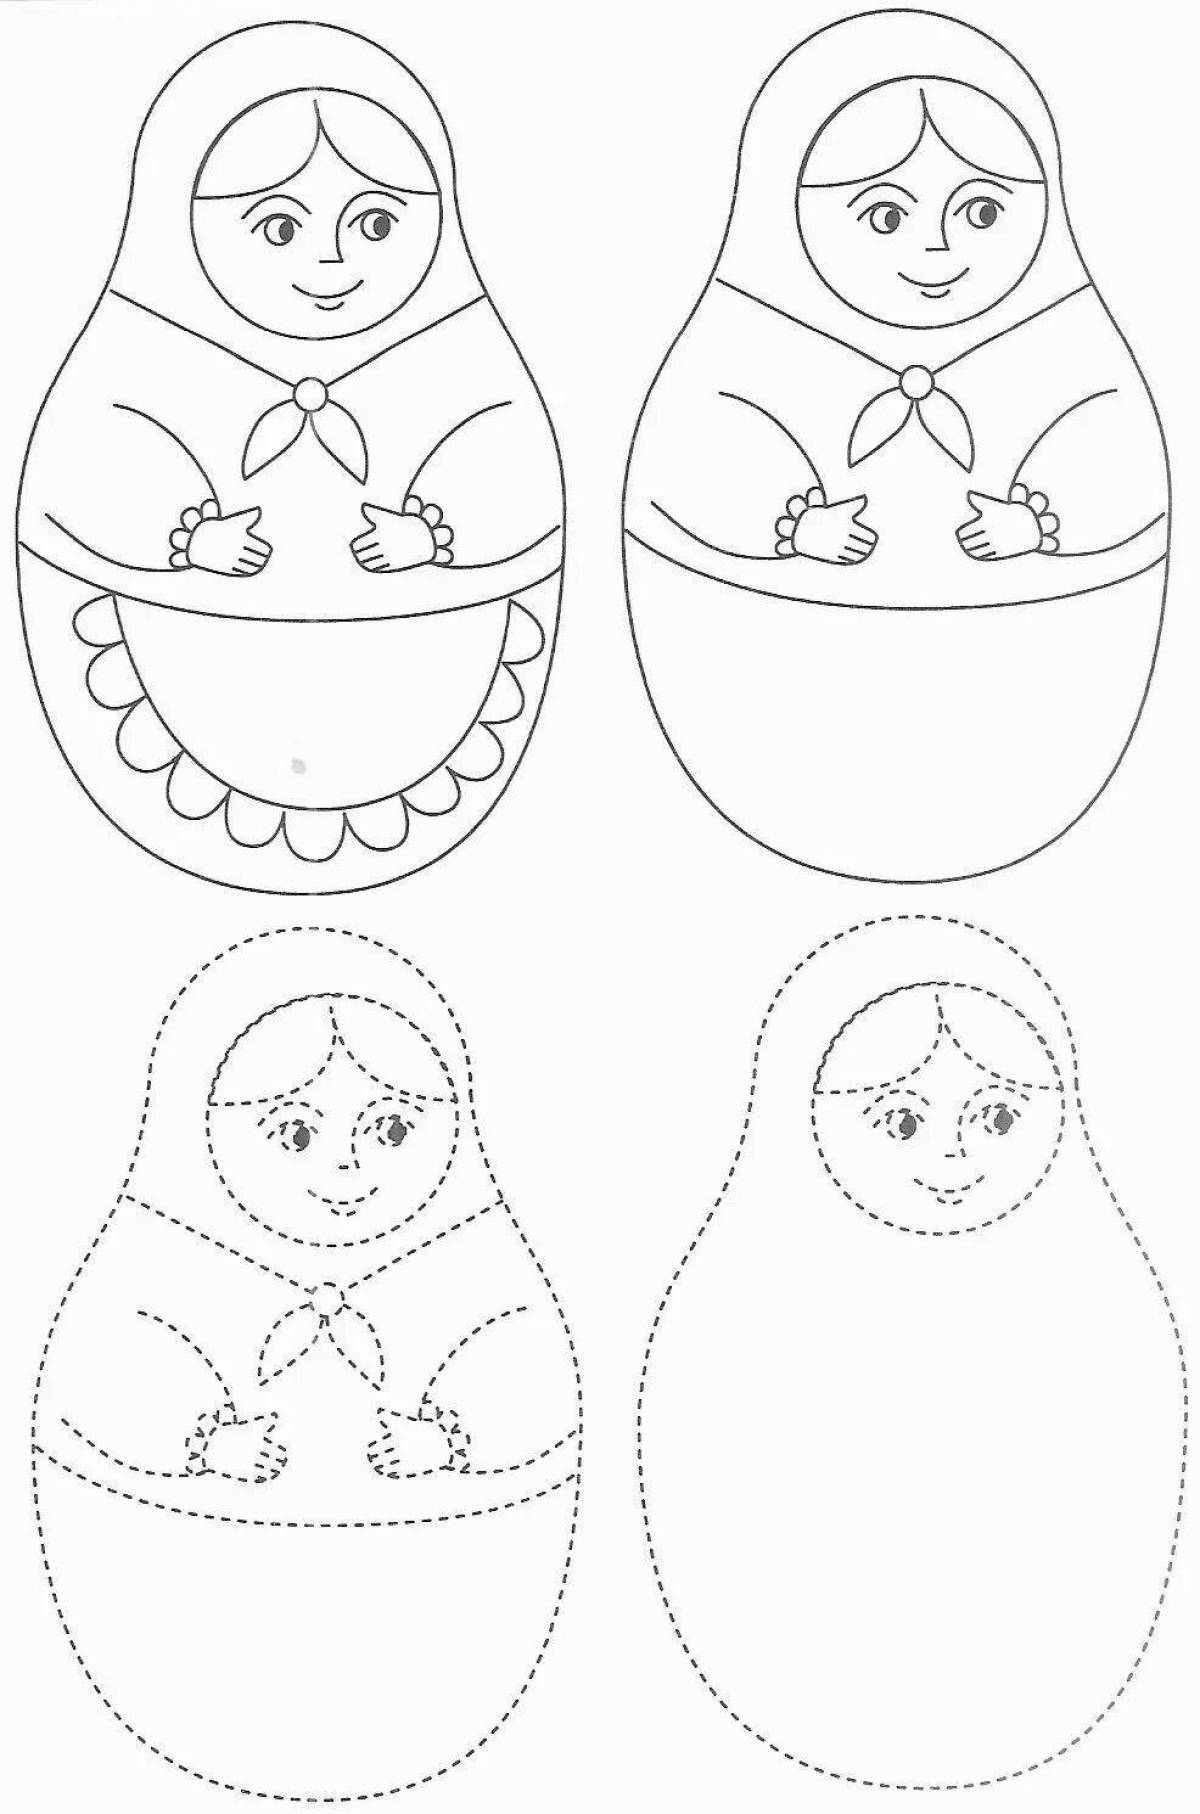 Multicolored matryoshka coloring book for children 5-6 years old